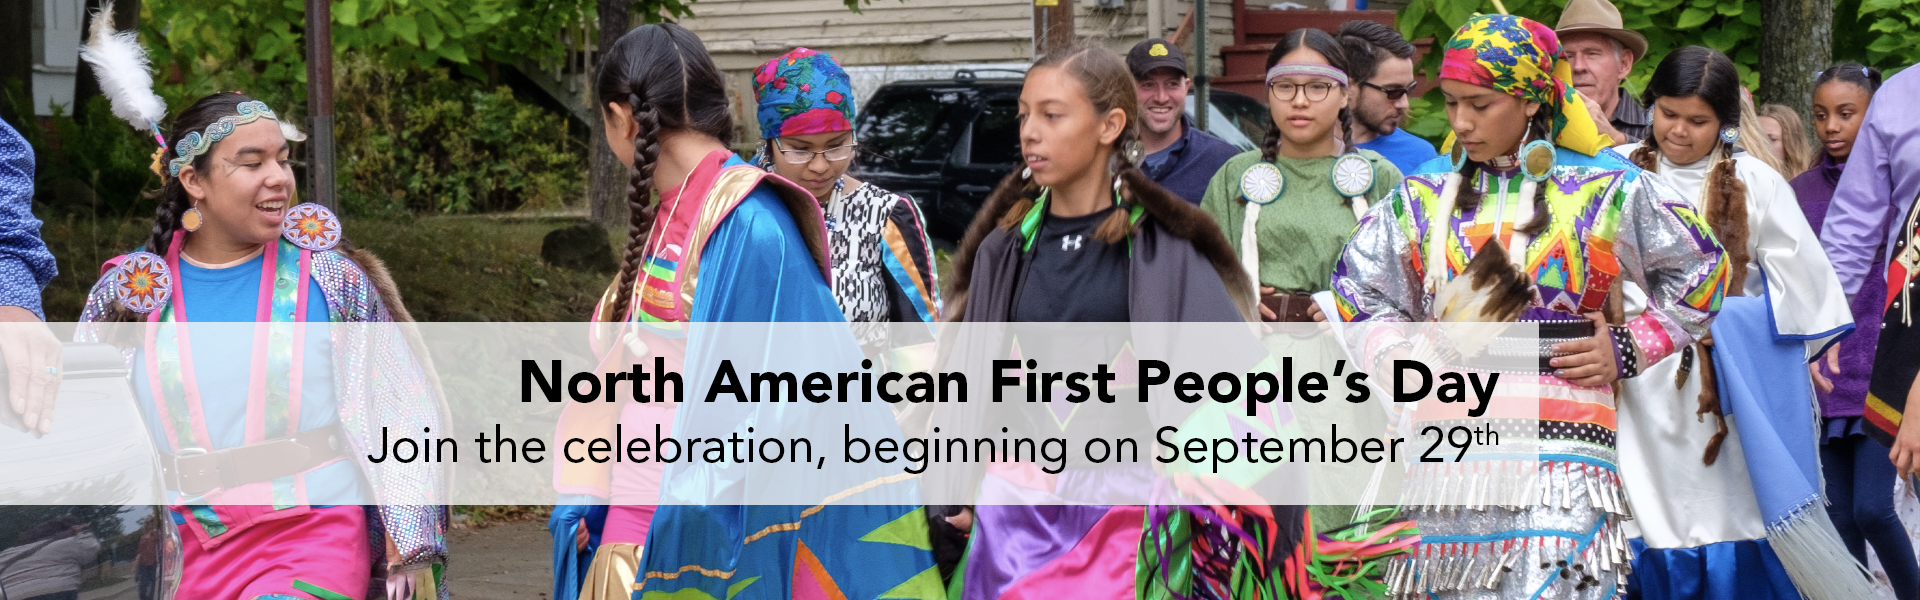 North American First People's Day celebrations begin September 29